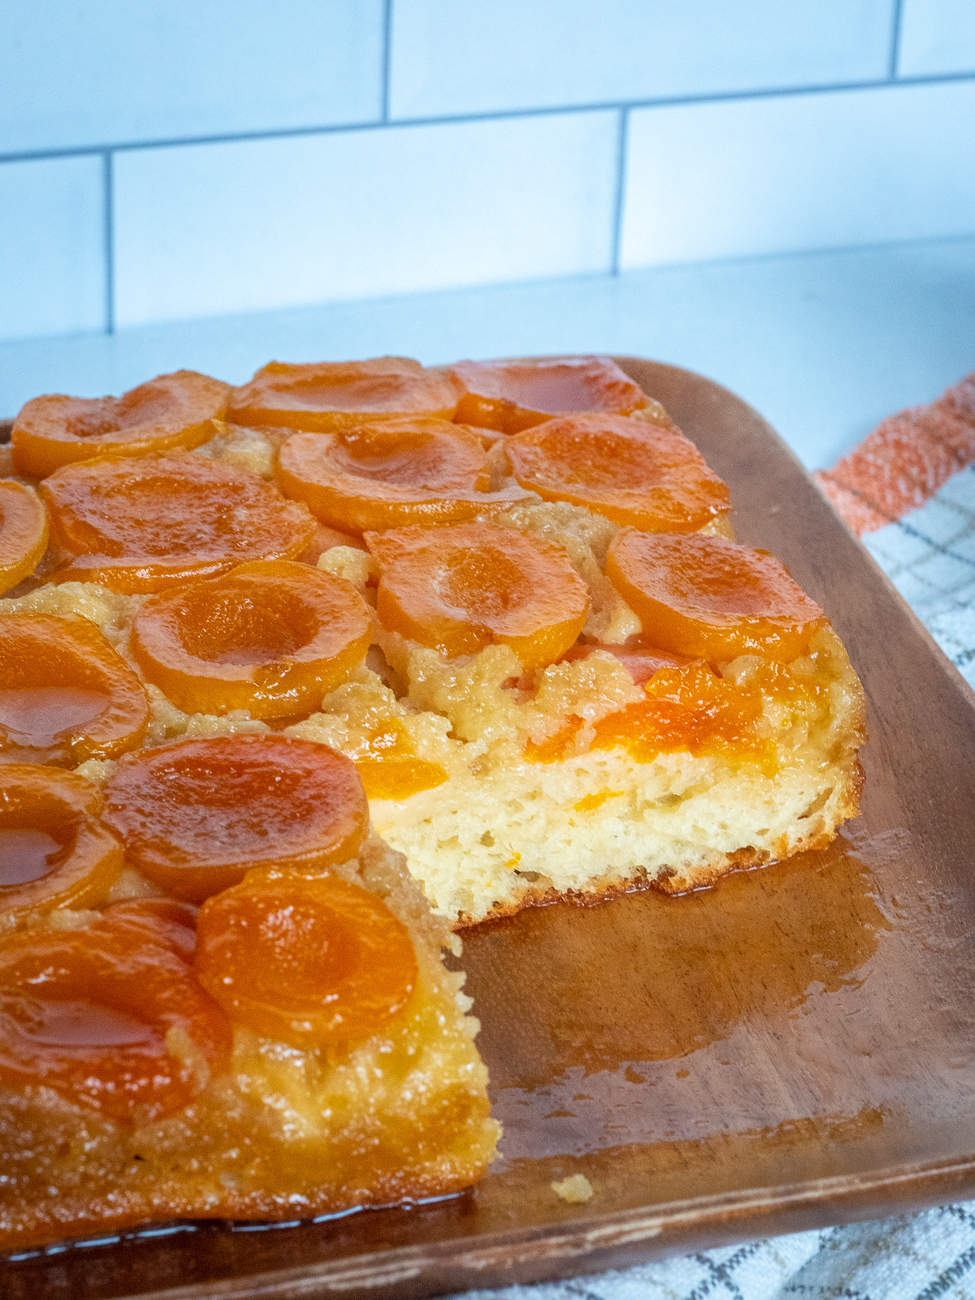 Apricot cake stock image. Image of food, cafe, industry - 1955563